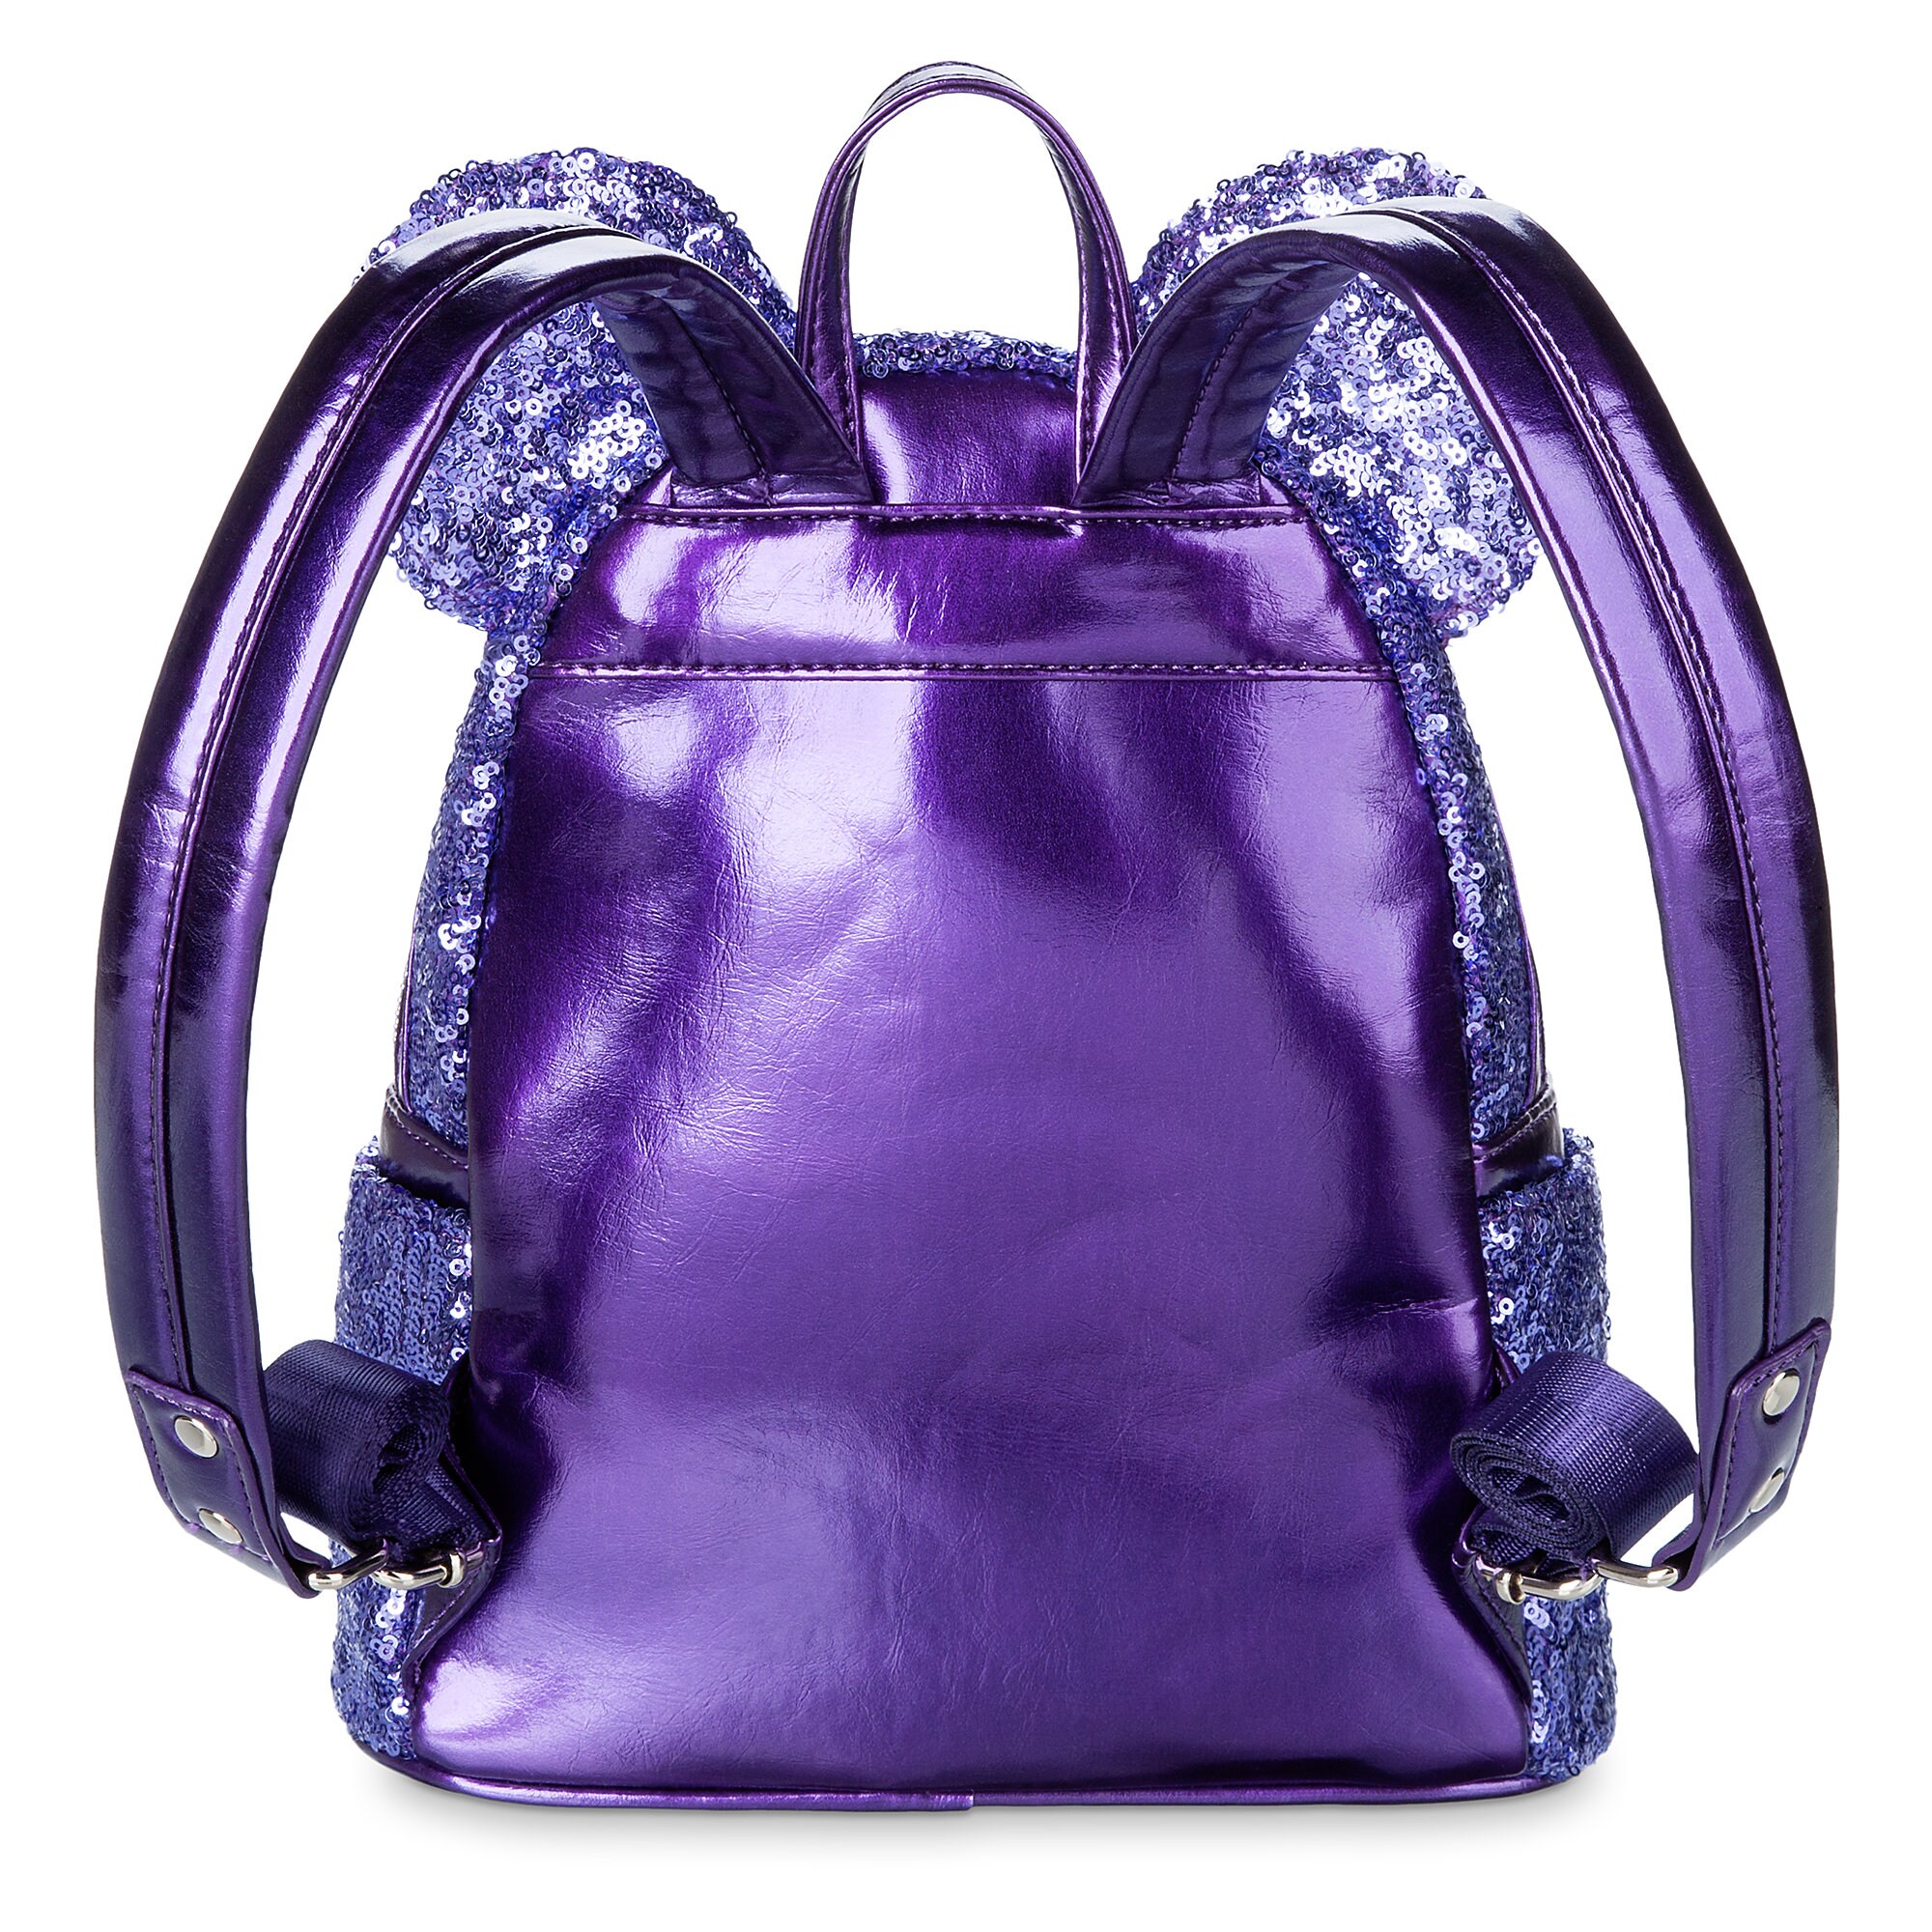 Minnie Mouse Potion Purple Sequined Mini Backpack by Loungefly